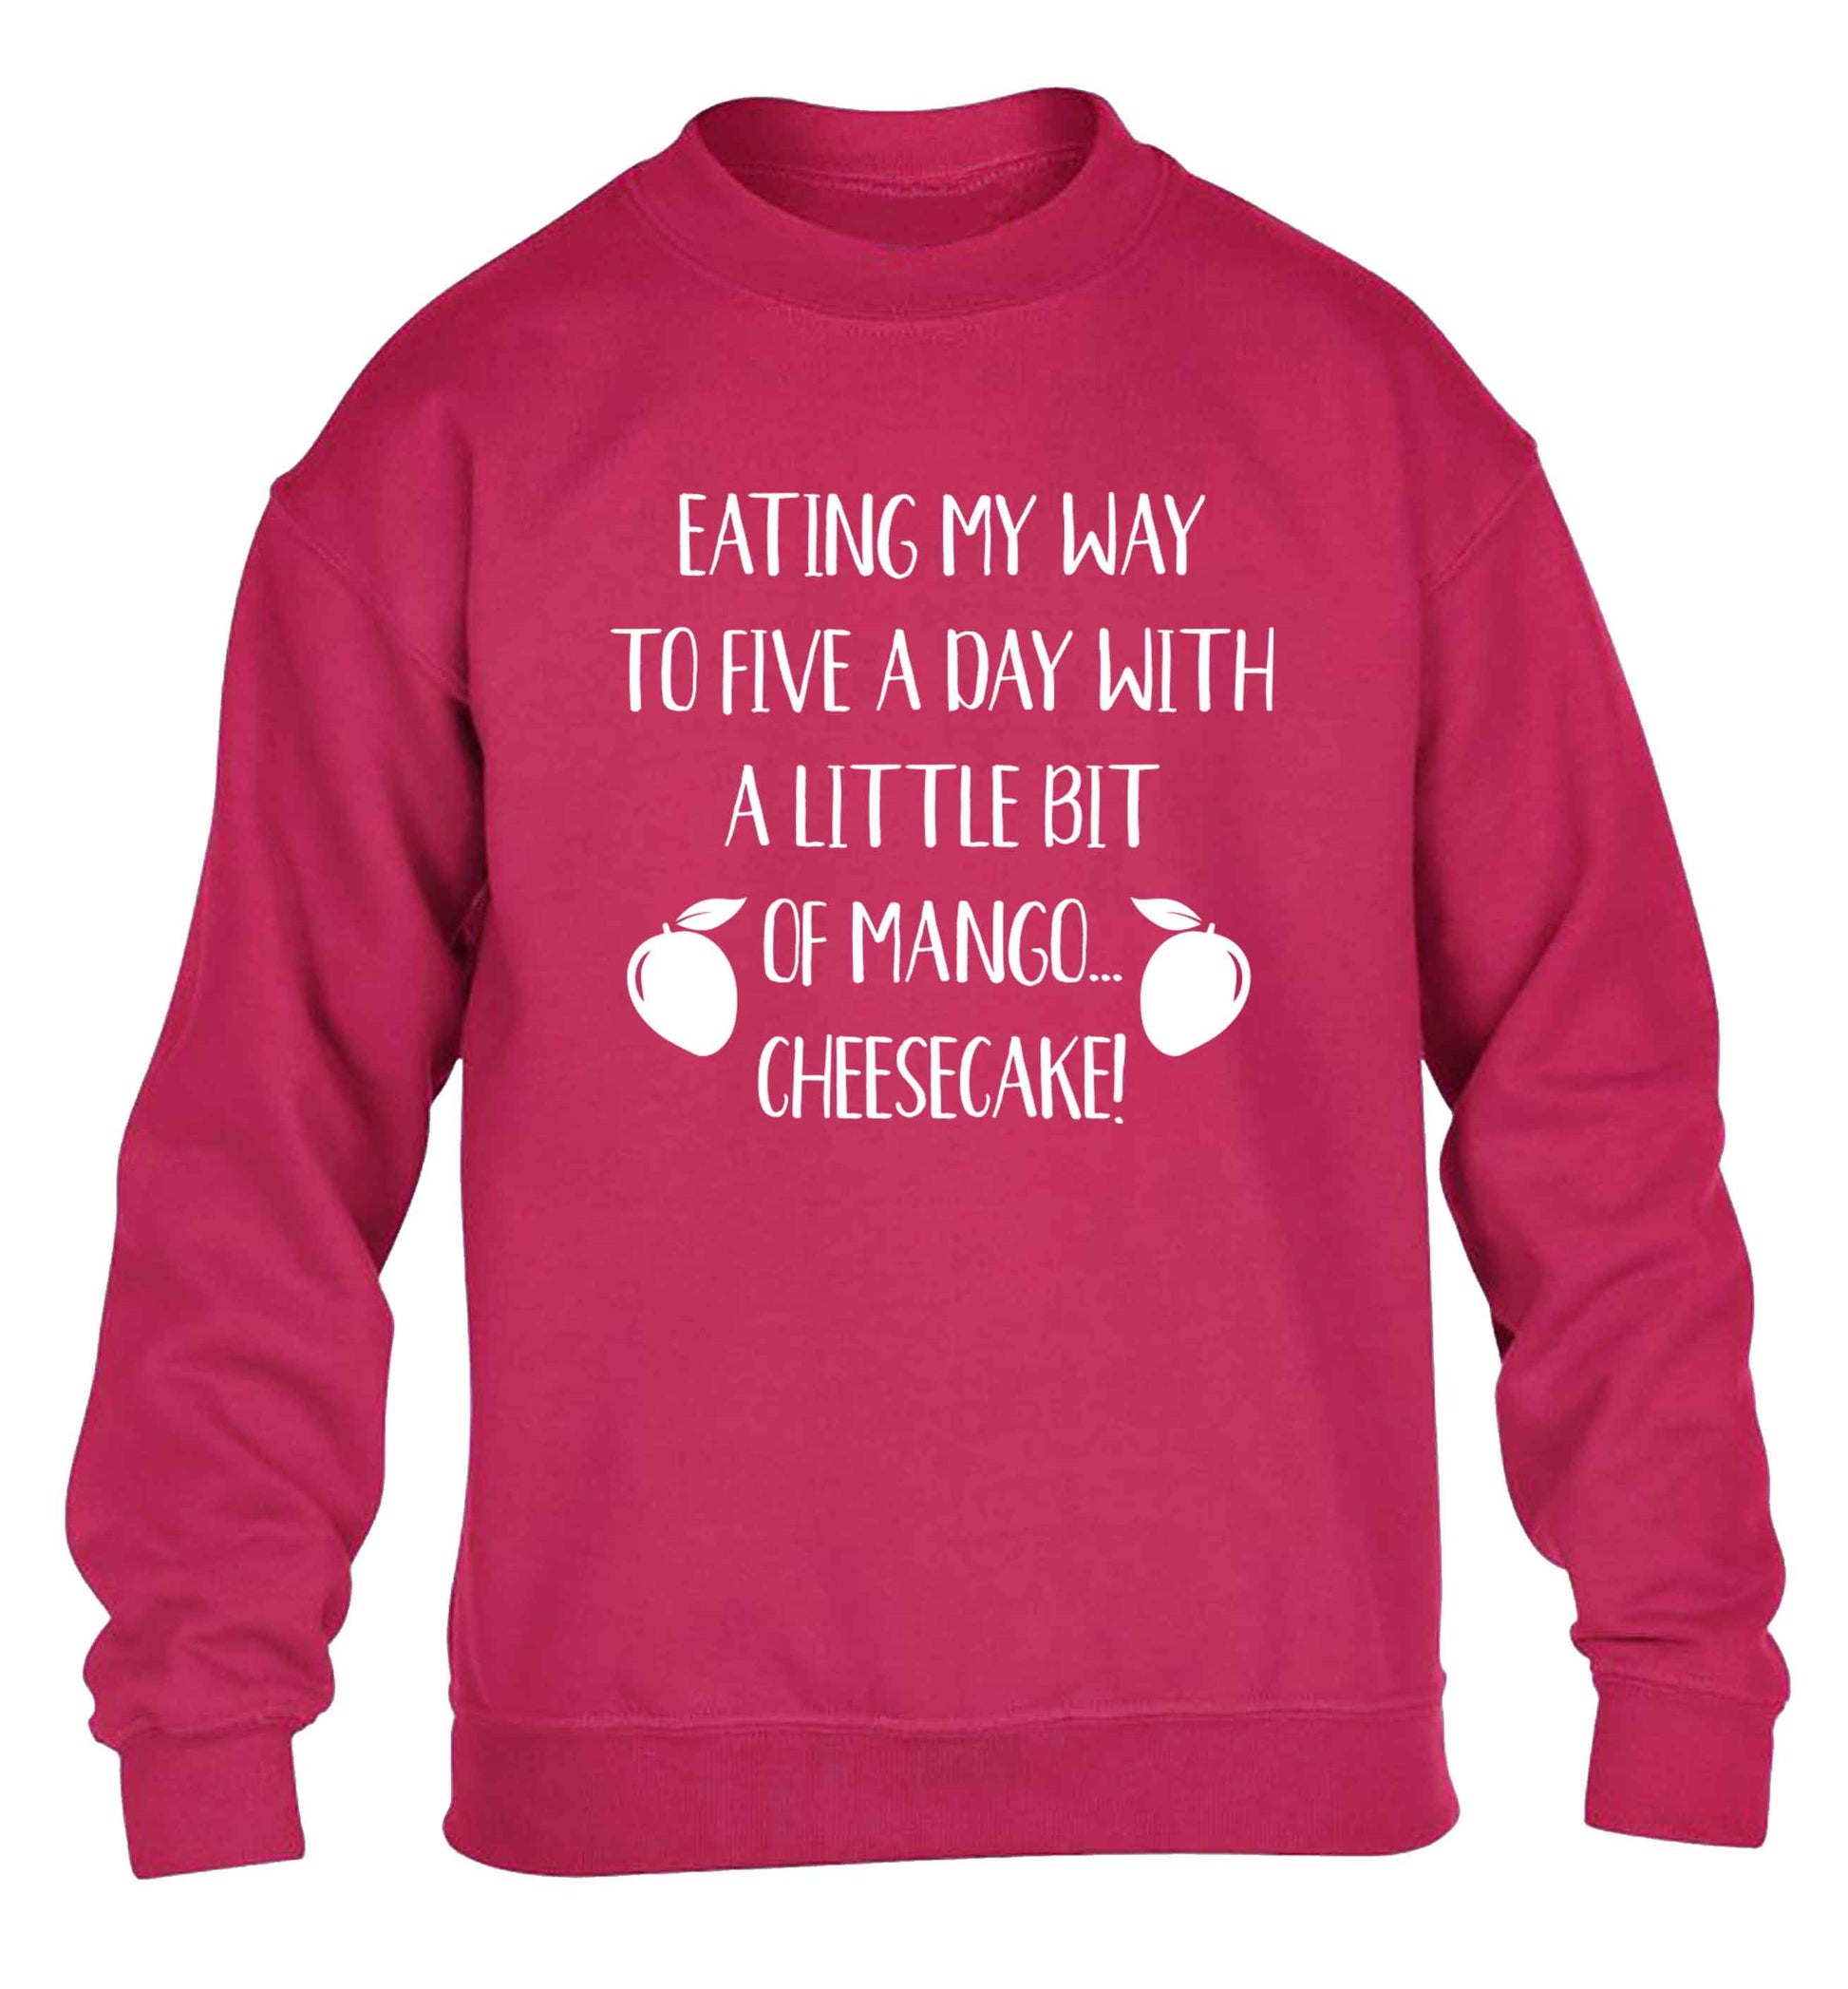 Eating my way to five a day with a little bit of mango cheesecake children's pink sweater 12-13 Years